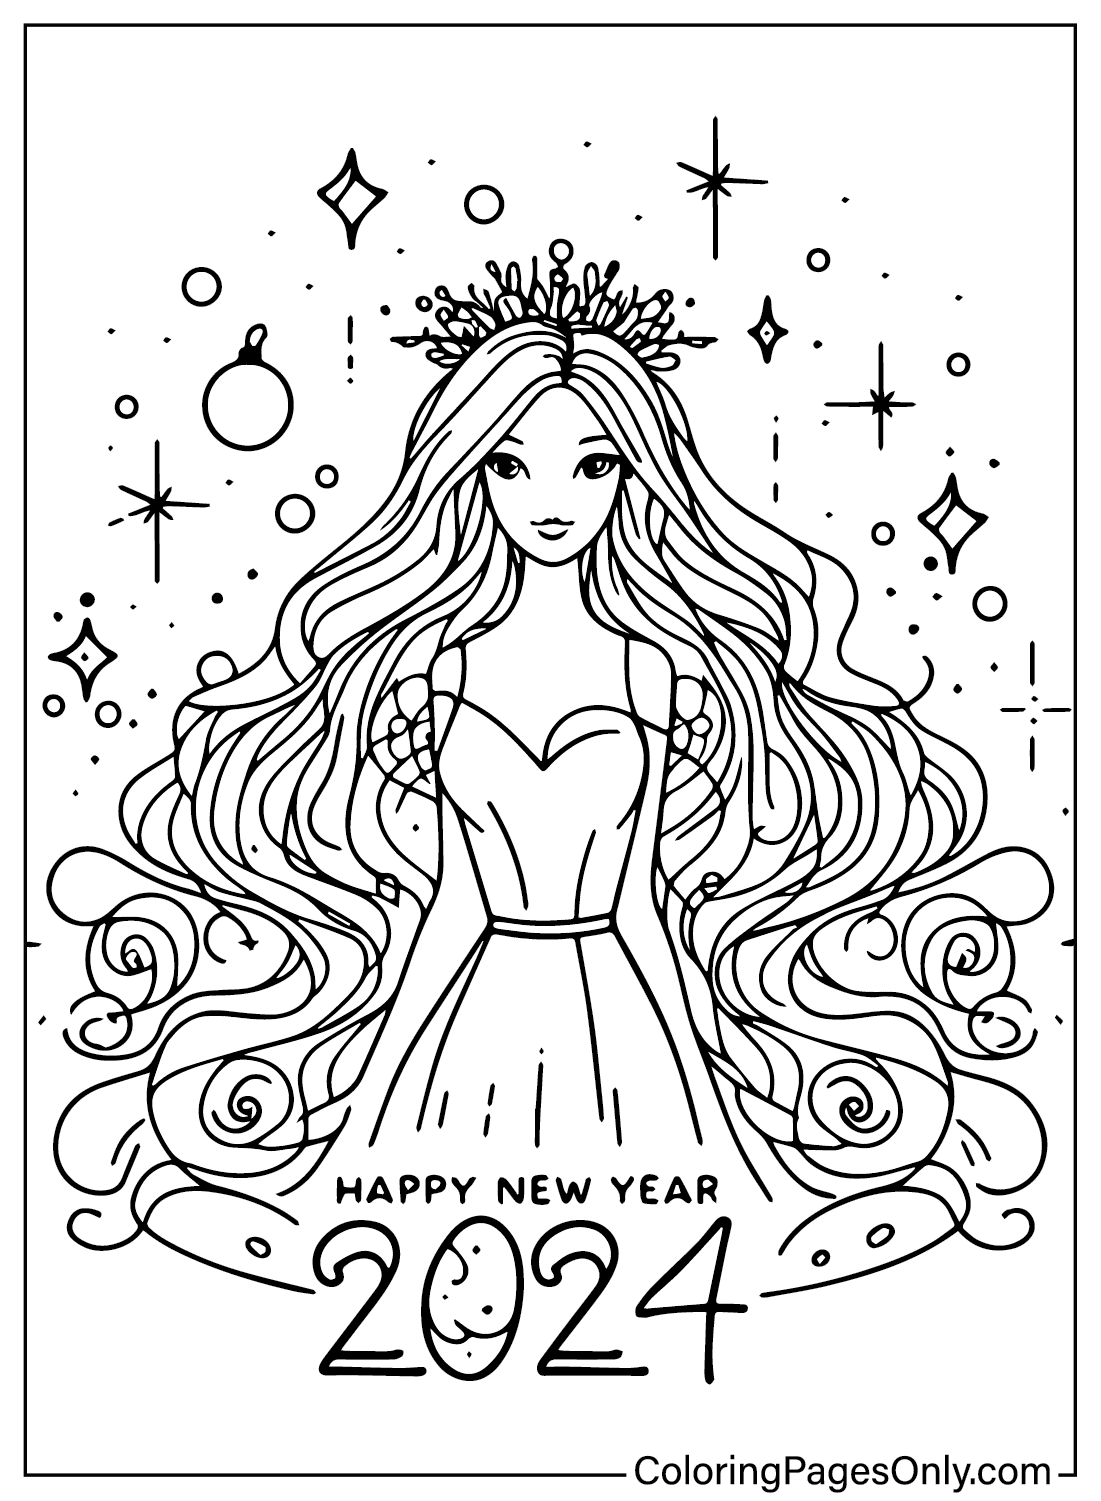 Coloring Sheet Happy New Year 2024